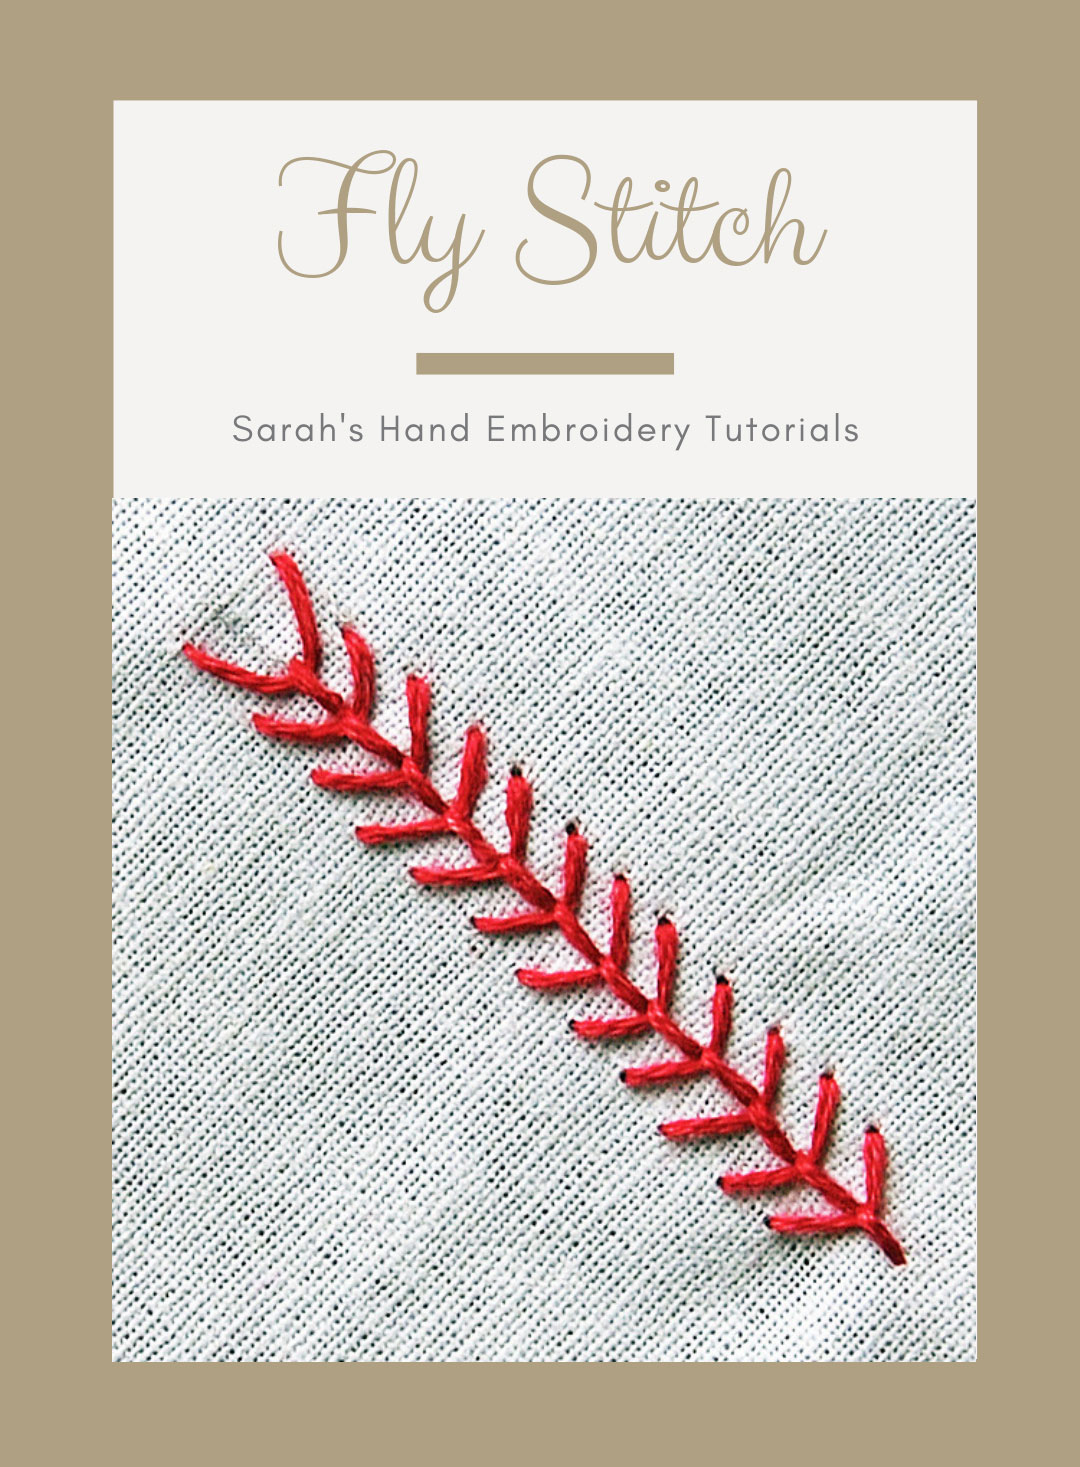 How to do the Fly Stitch - Sarah's Hand Embroidery Tutorials